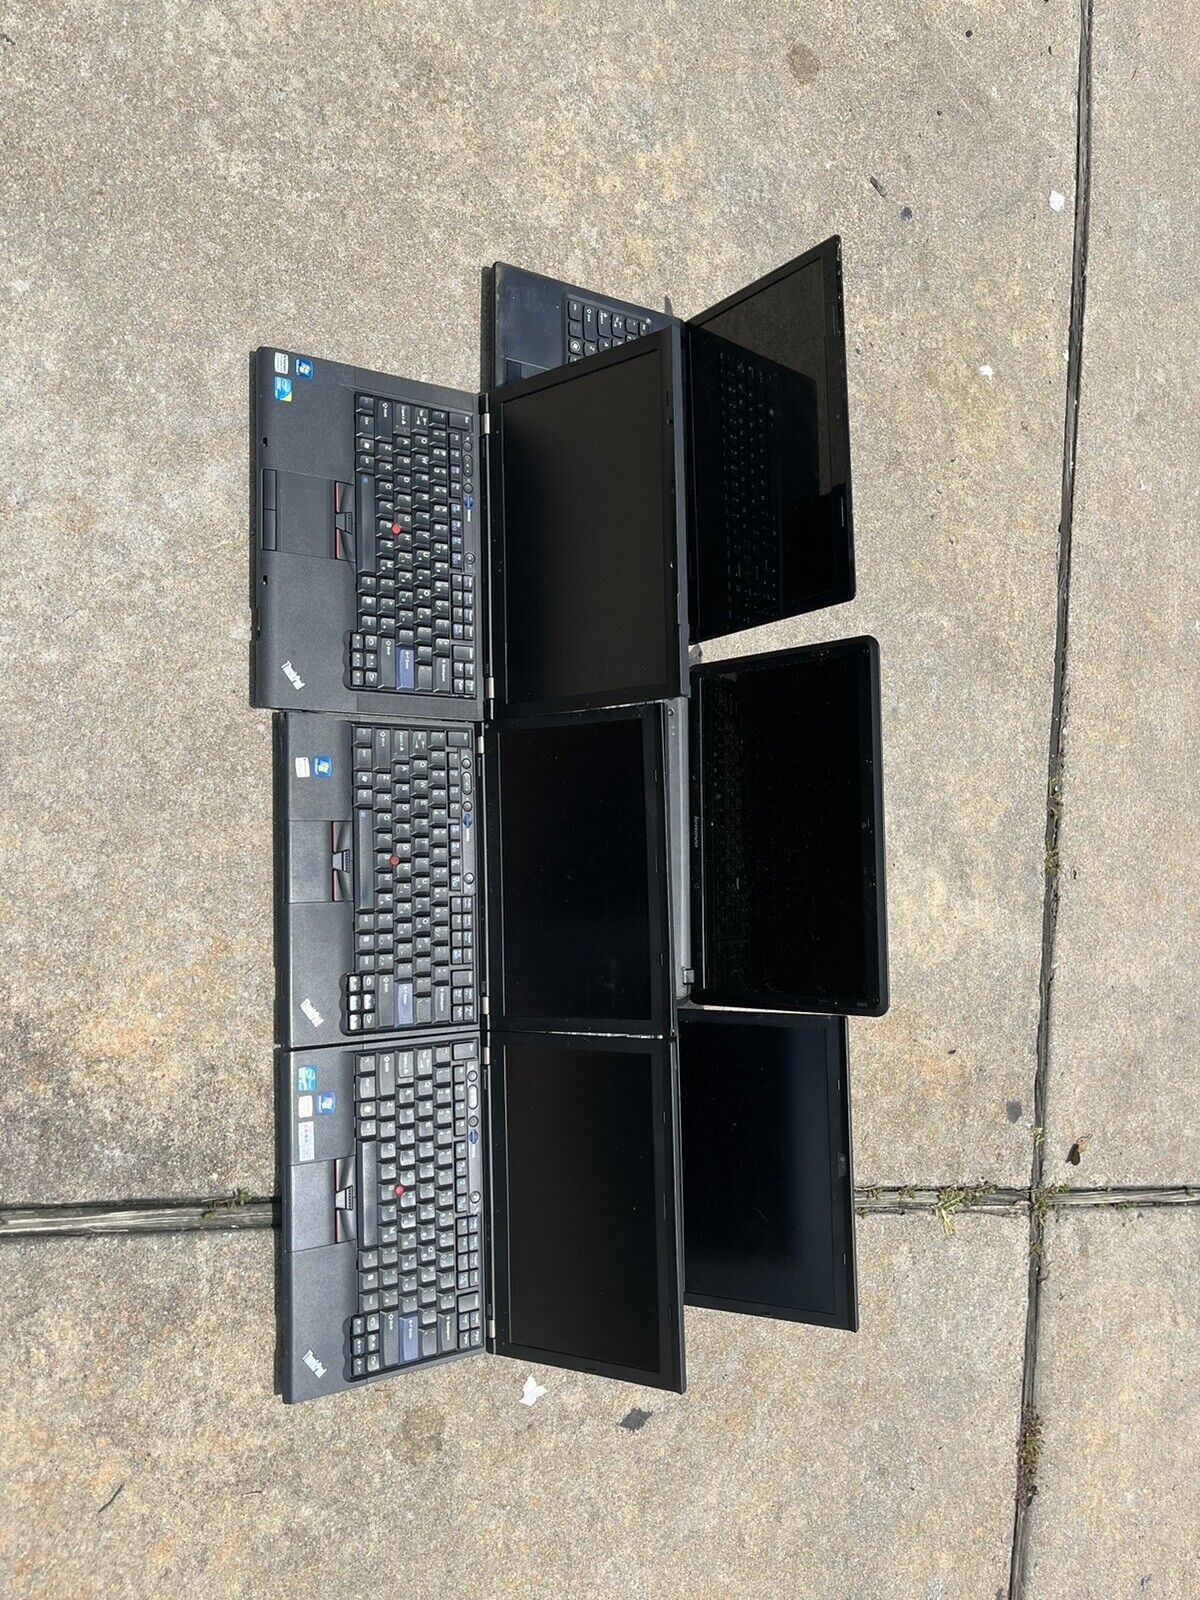 6 Lenovo Laptops X220 T410 I5 Thinkpads For Parts Repair Untested As-is